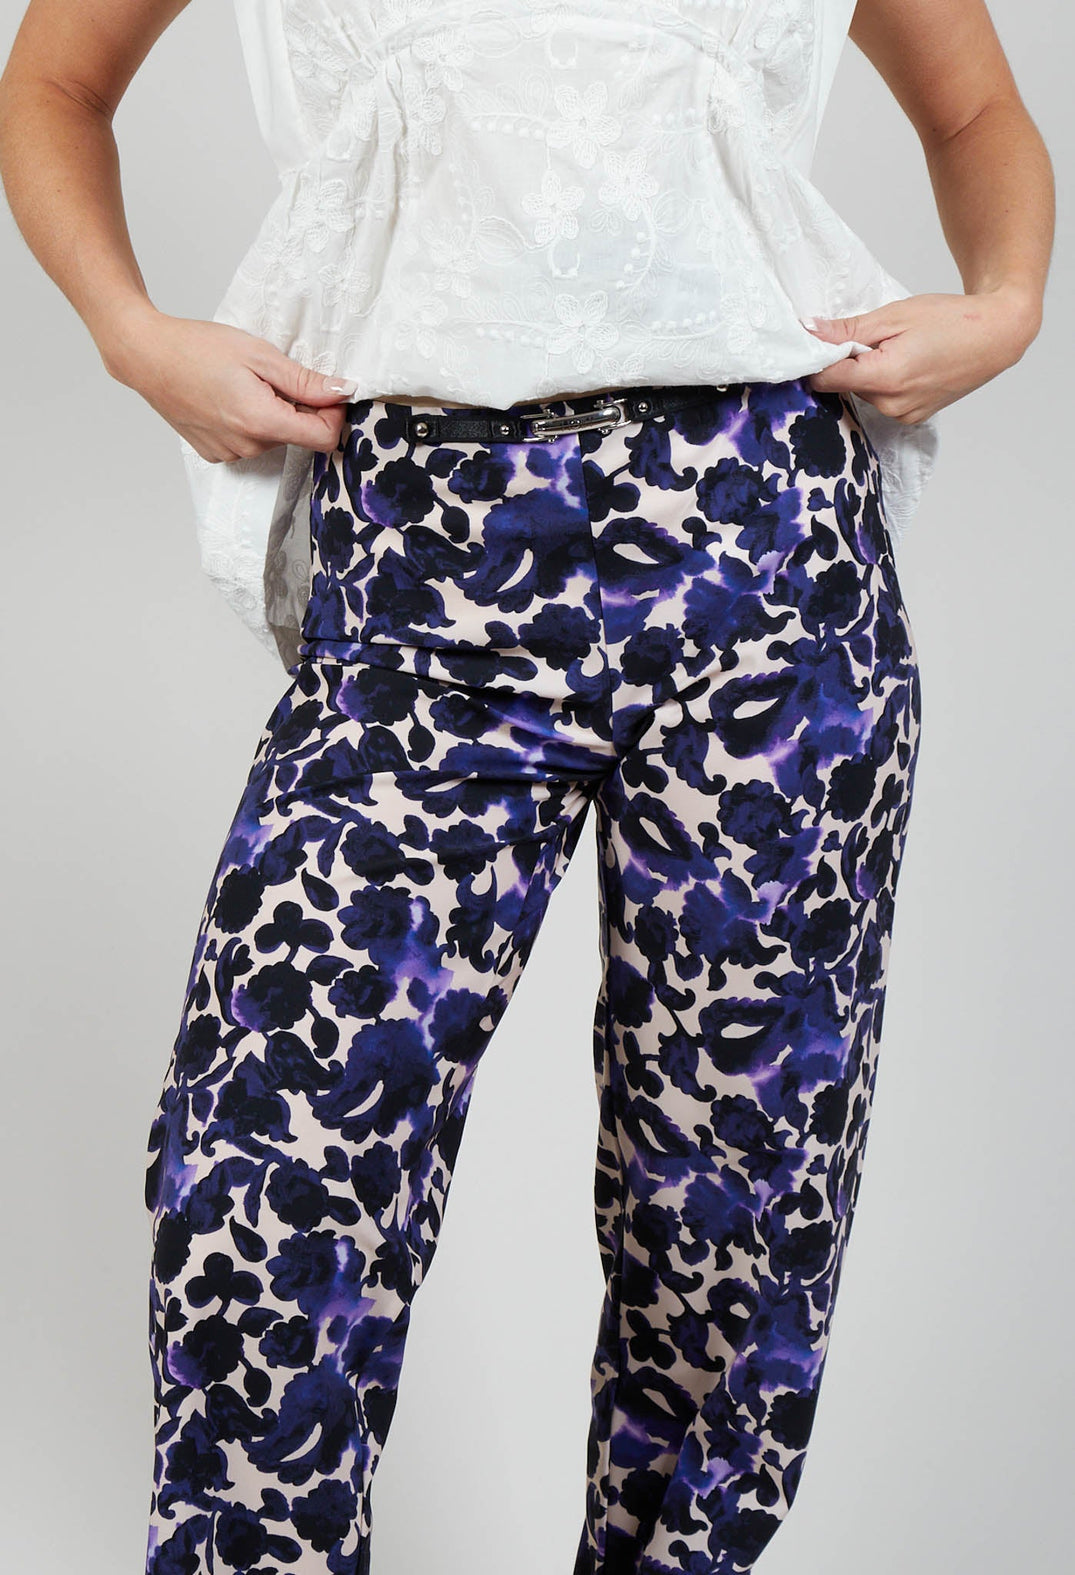 Proceed Trousers in Purple Floral